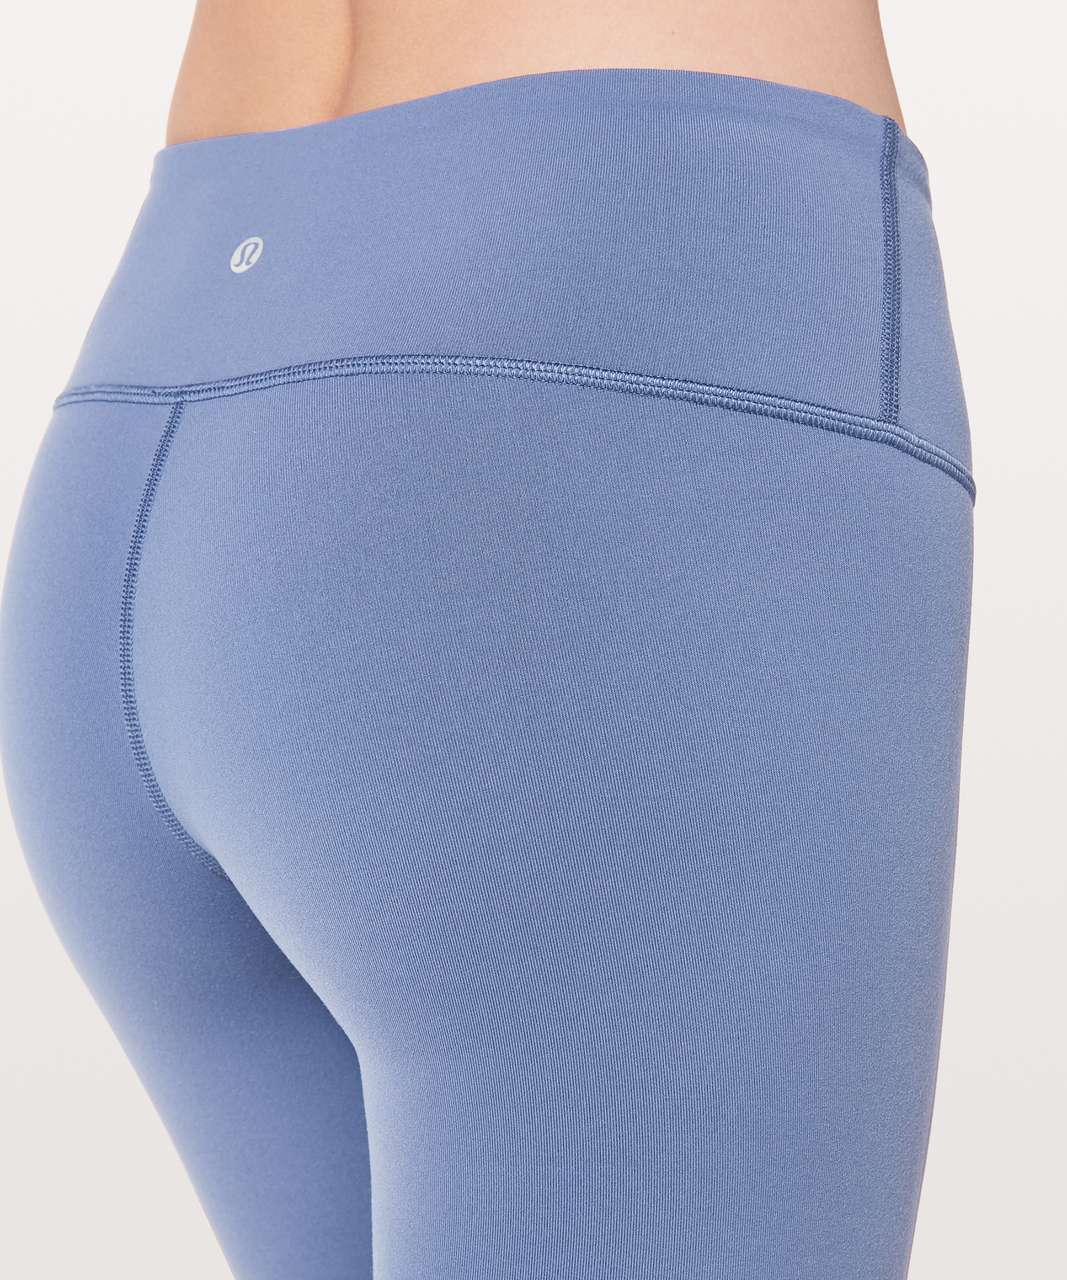 Lululemon Wunder Under Low-Rise Tight 28 Luon Variegated Knit